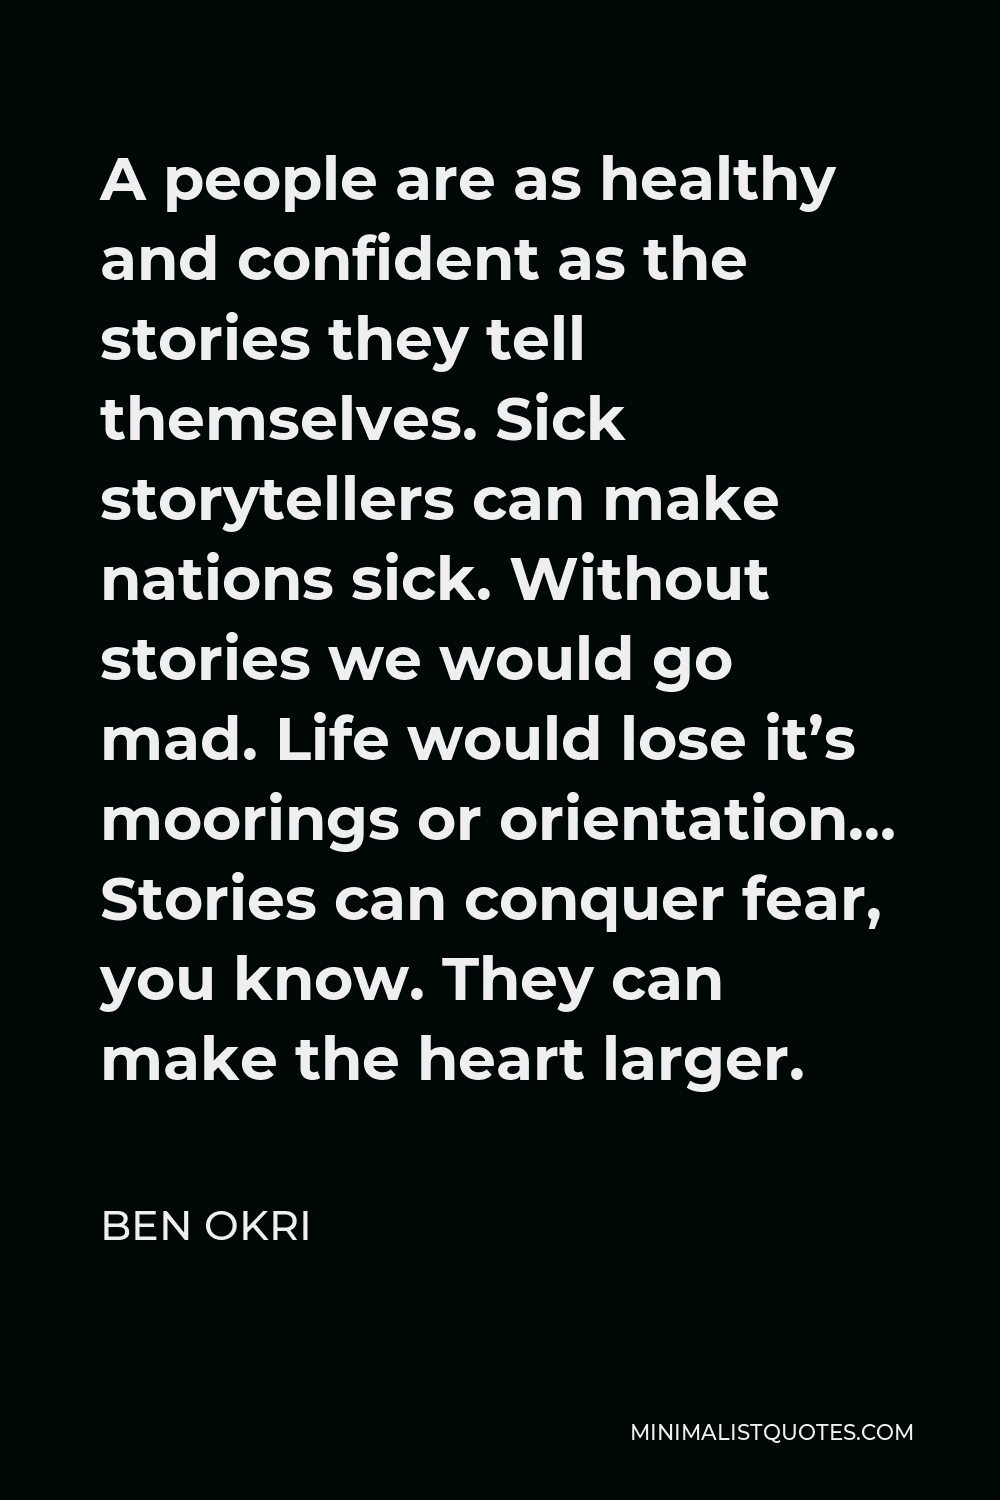 Ben Okri Quote - A people are as healthy and confident as the stories they tell themselves. Sick storytellers can make nations sick. Without stories we would go mad. Life would lose it’s moorings or orientation… Stories can conquer fear, you know. They can make the heart larger.